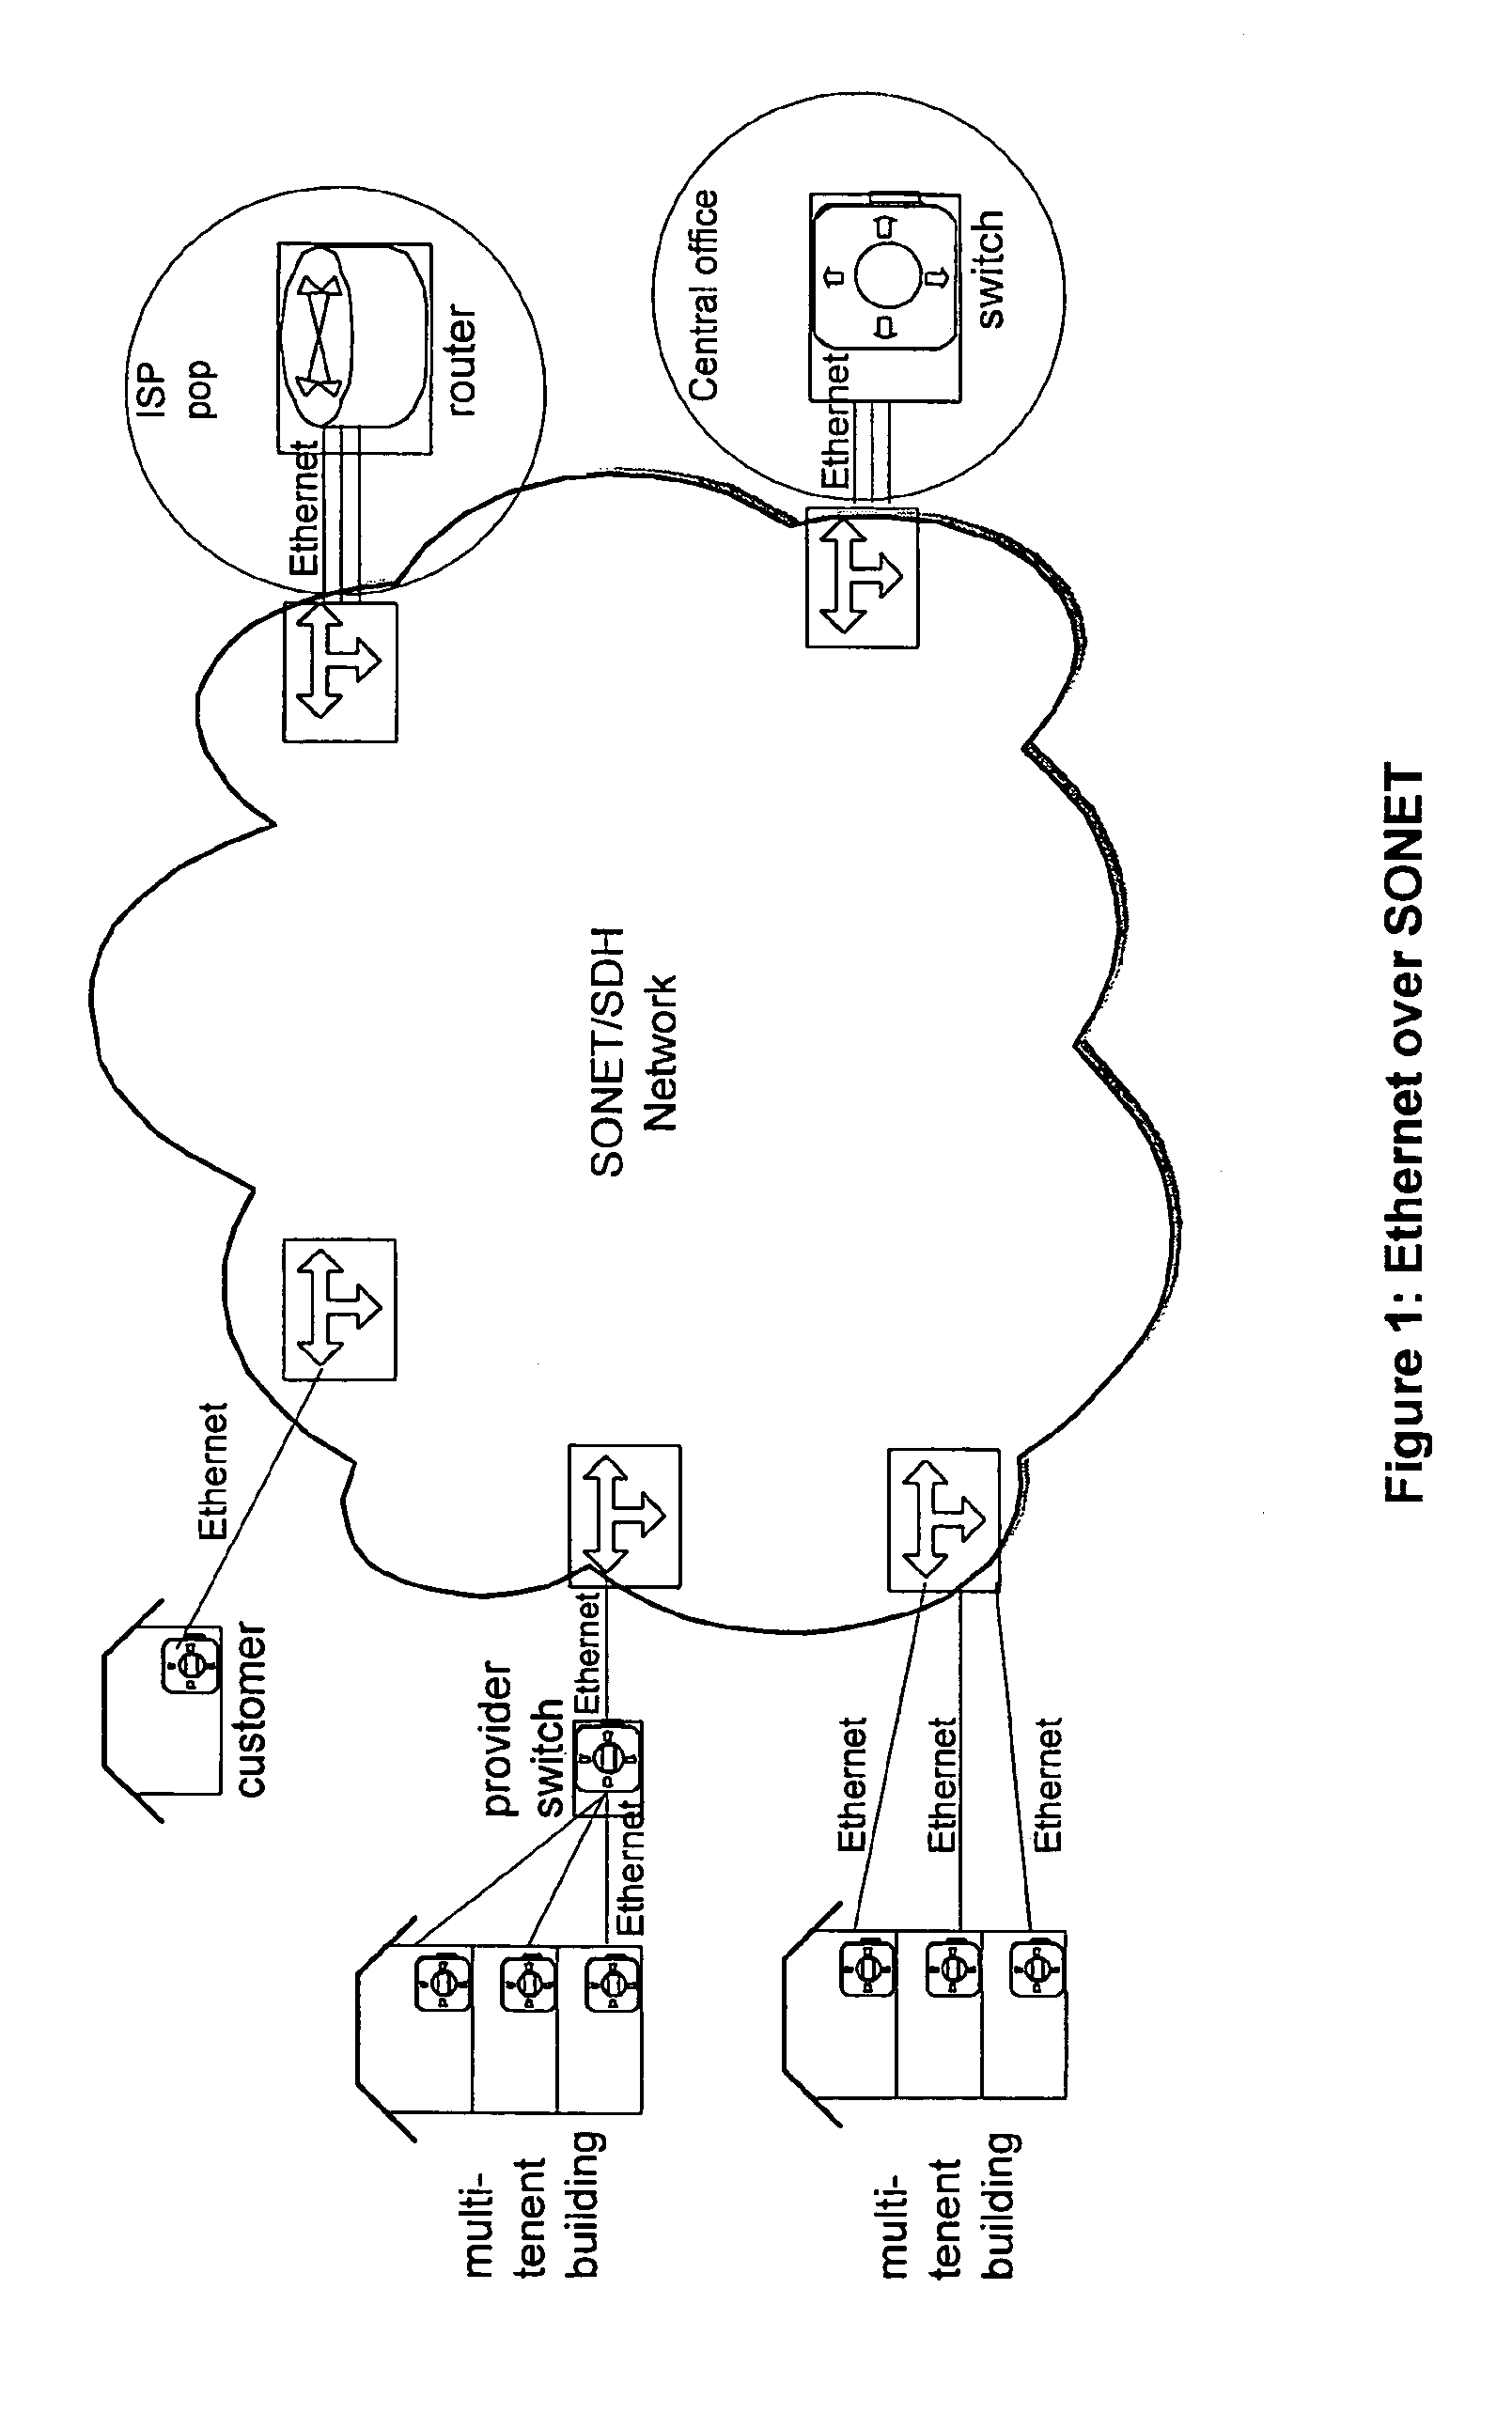 Method and apparatus for packet grooming and aggregation